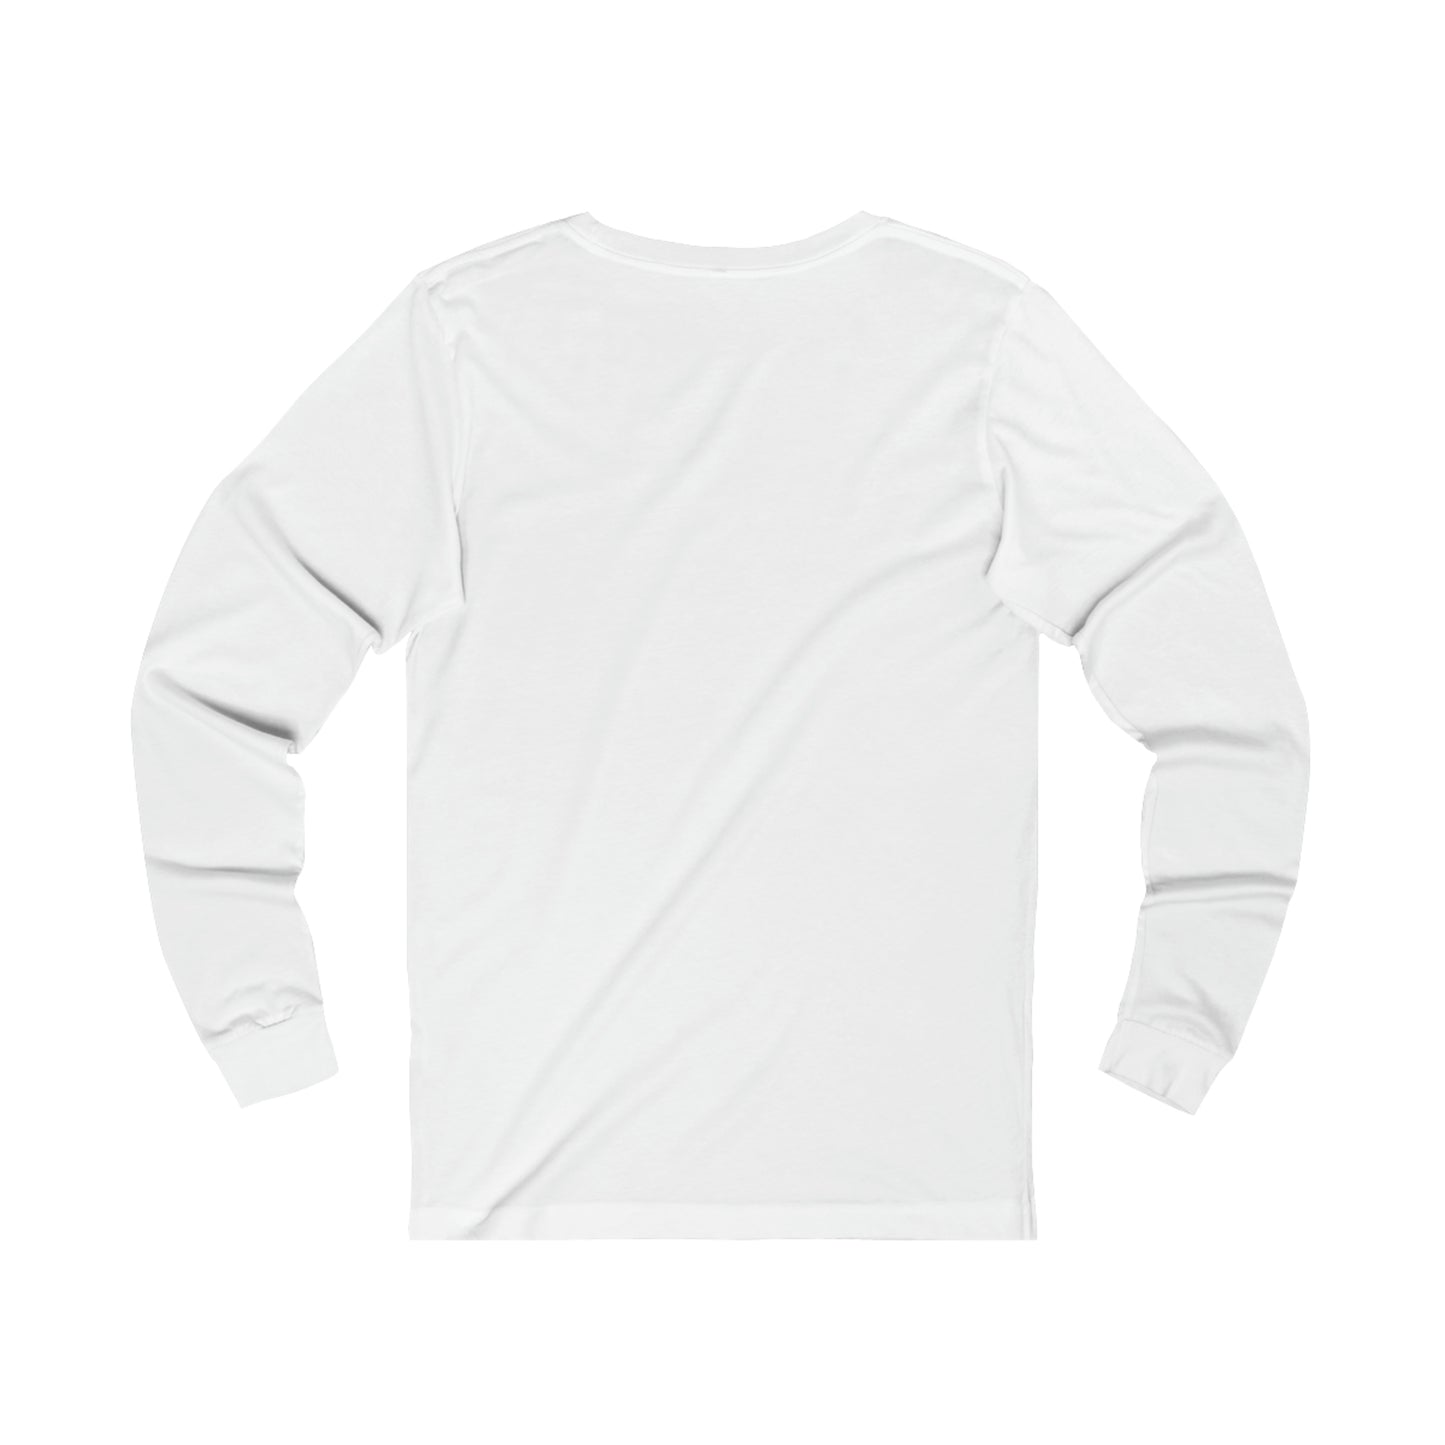 flwr pwr - long sleeve graphic tee